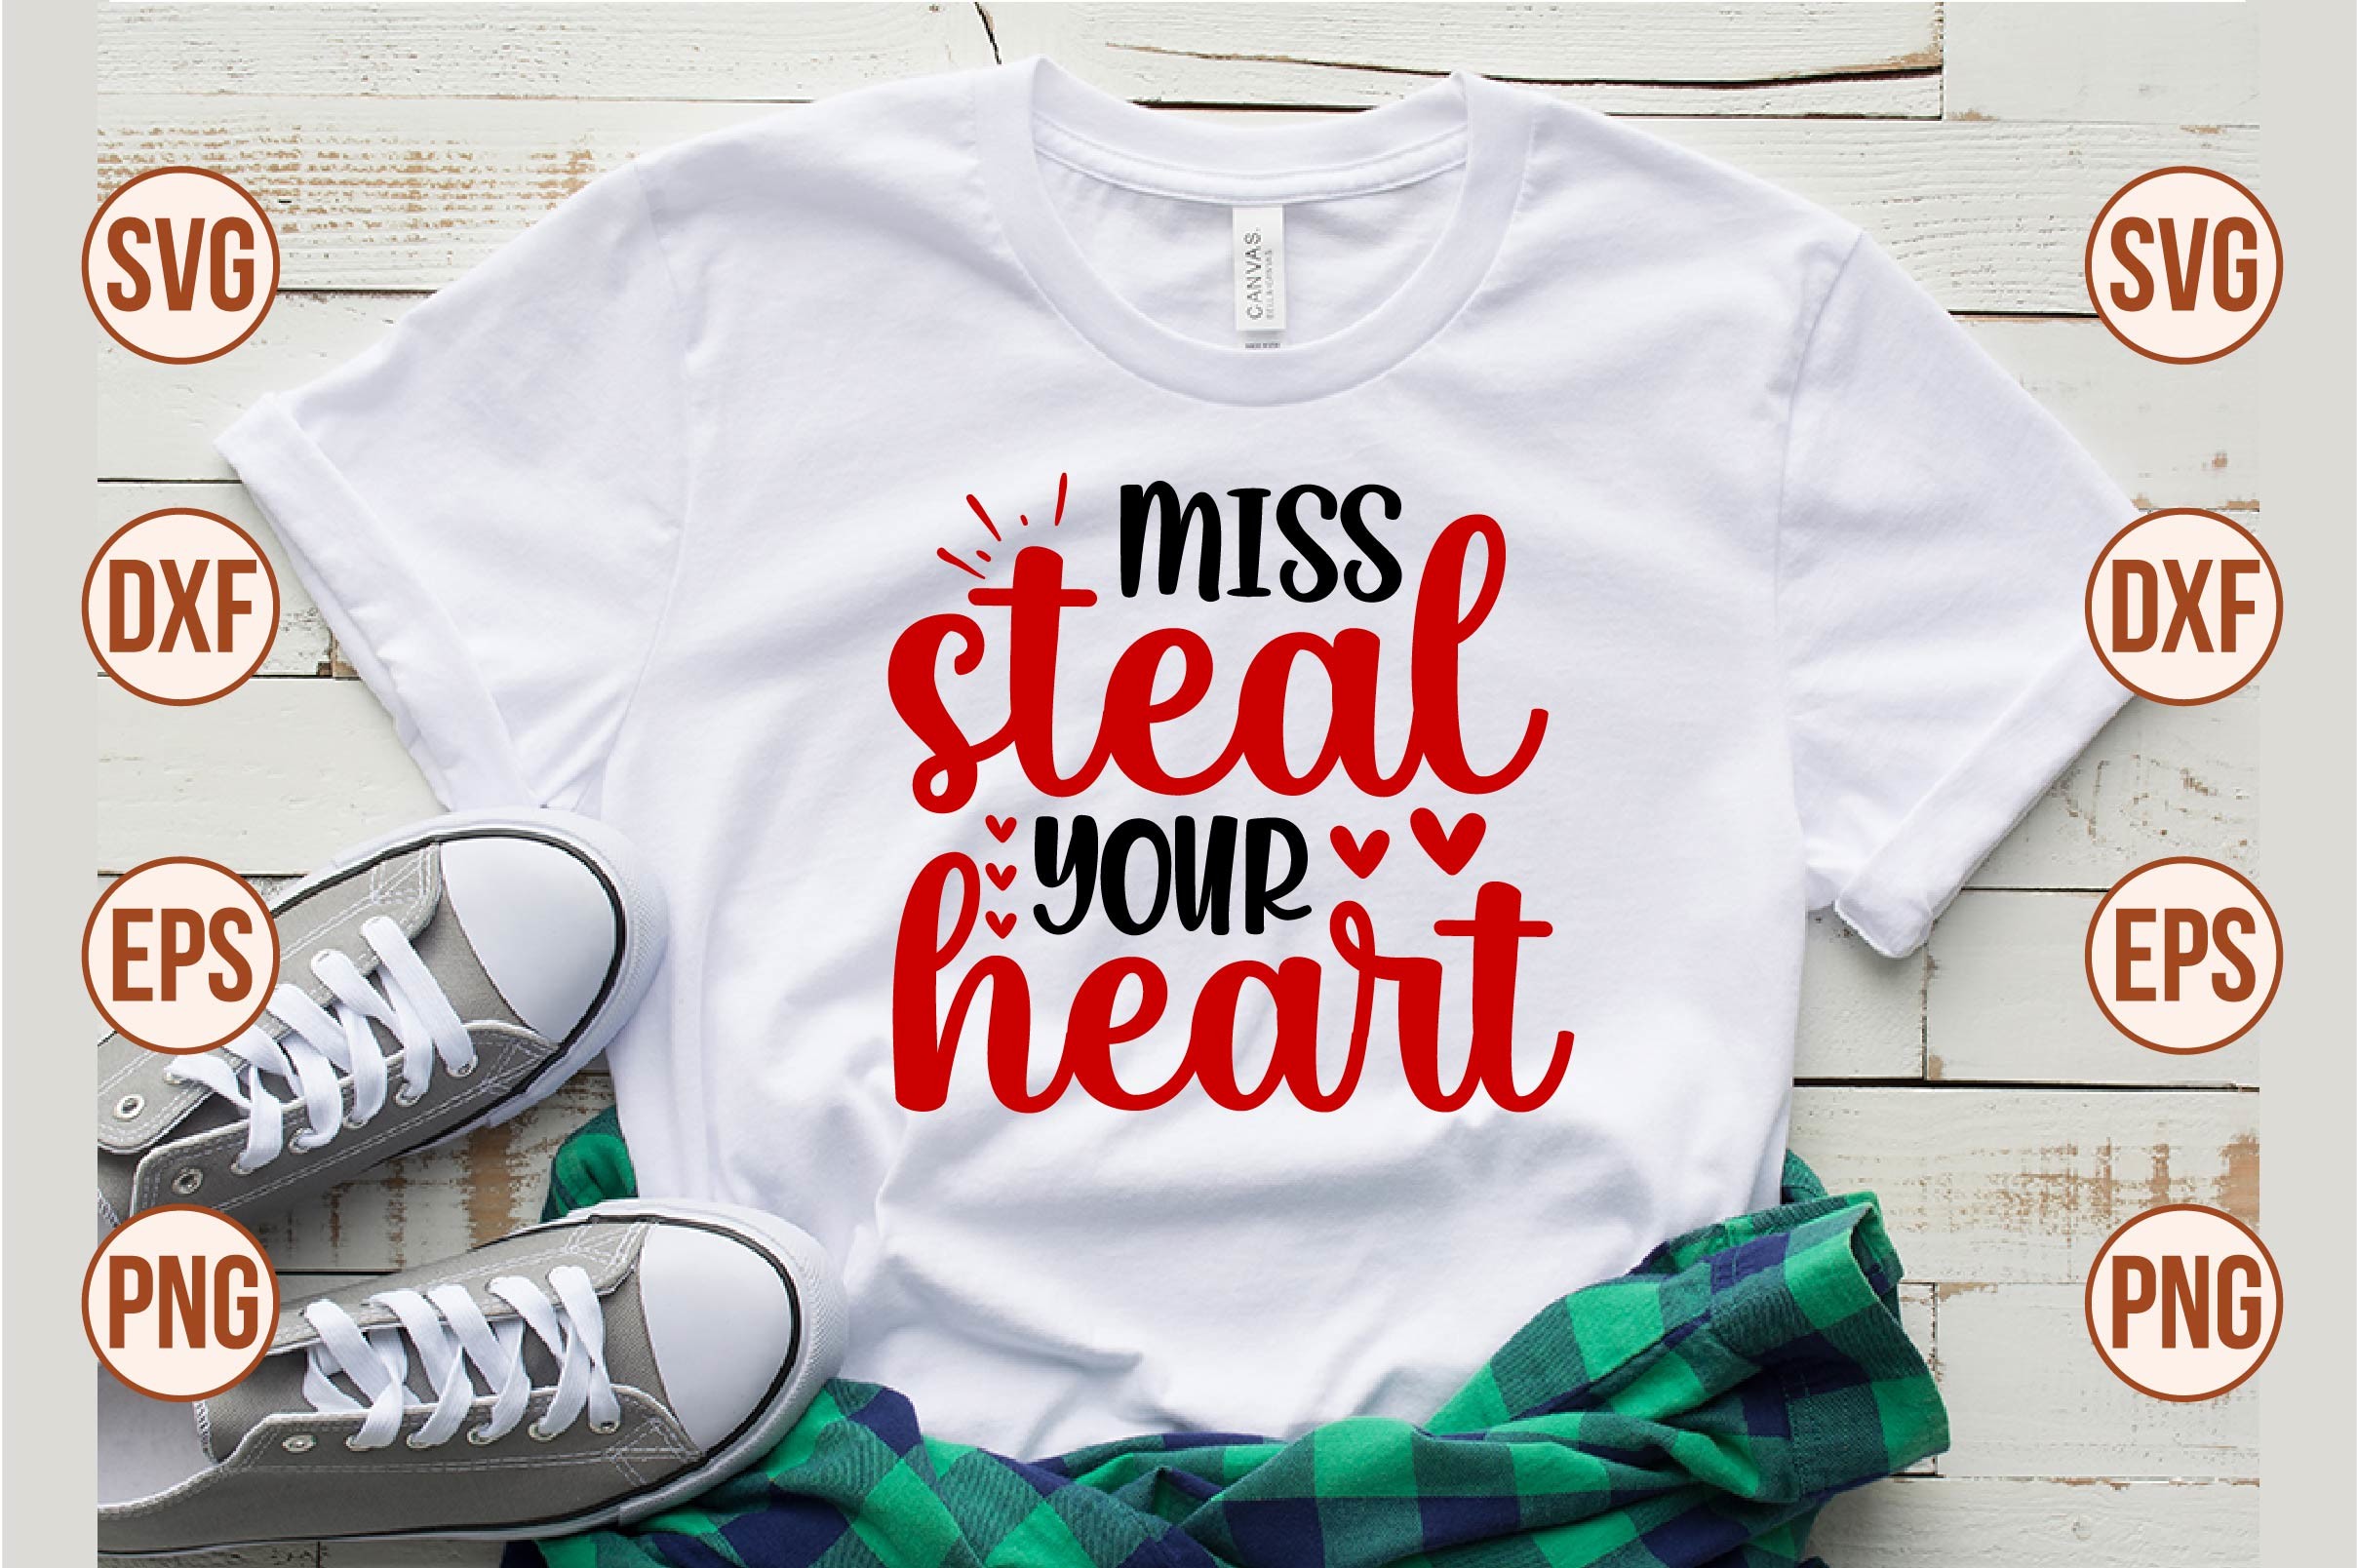 Miss Steal Your Heart Svg Graphic by sadiqul7383 · Creative Fabrica